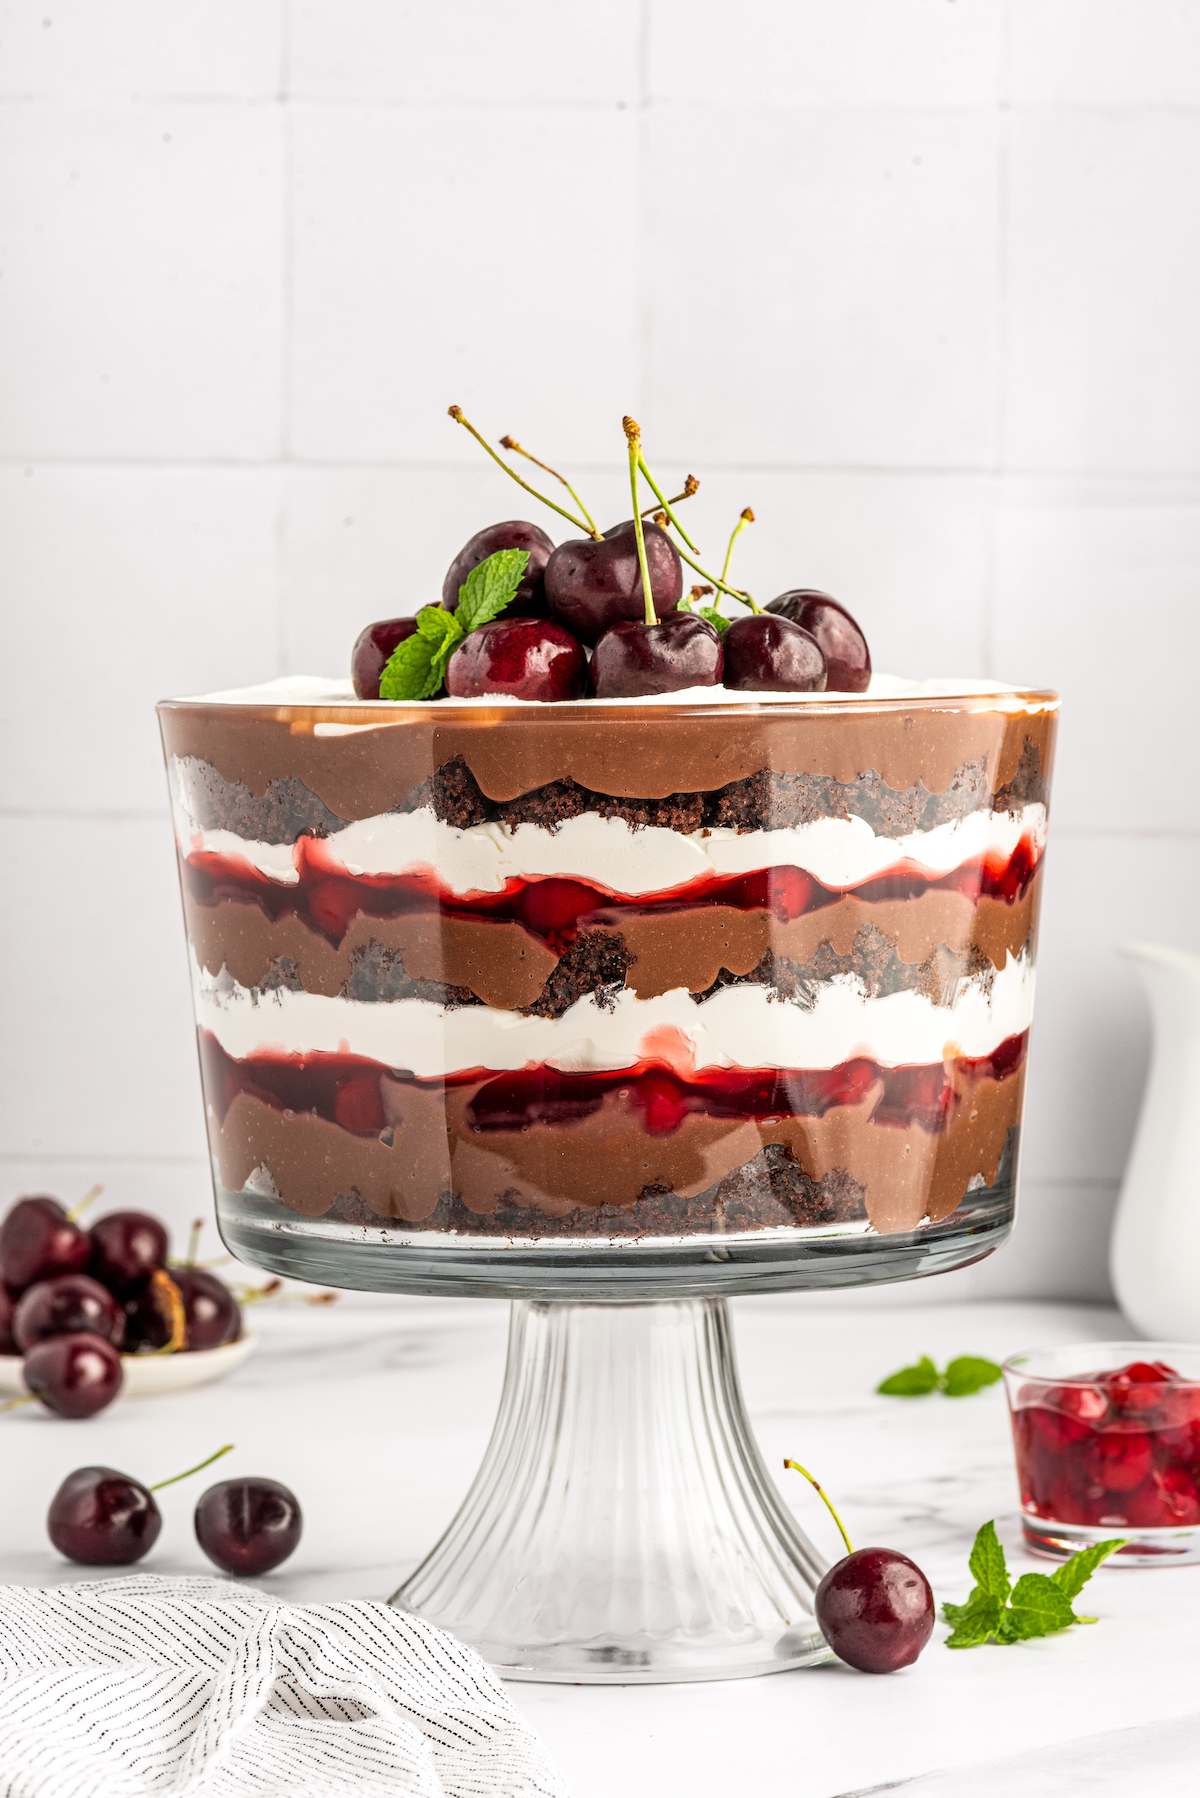 A finished Black Forest trifle from the side, showing layers.